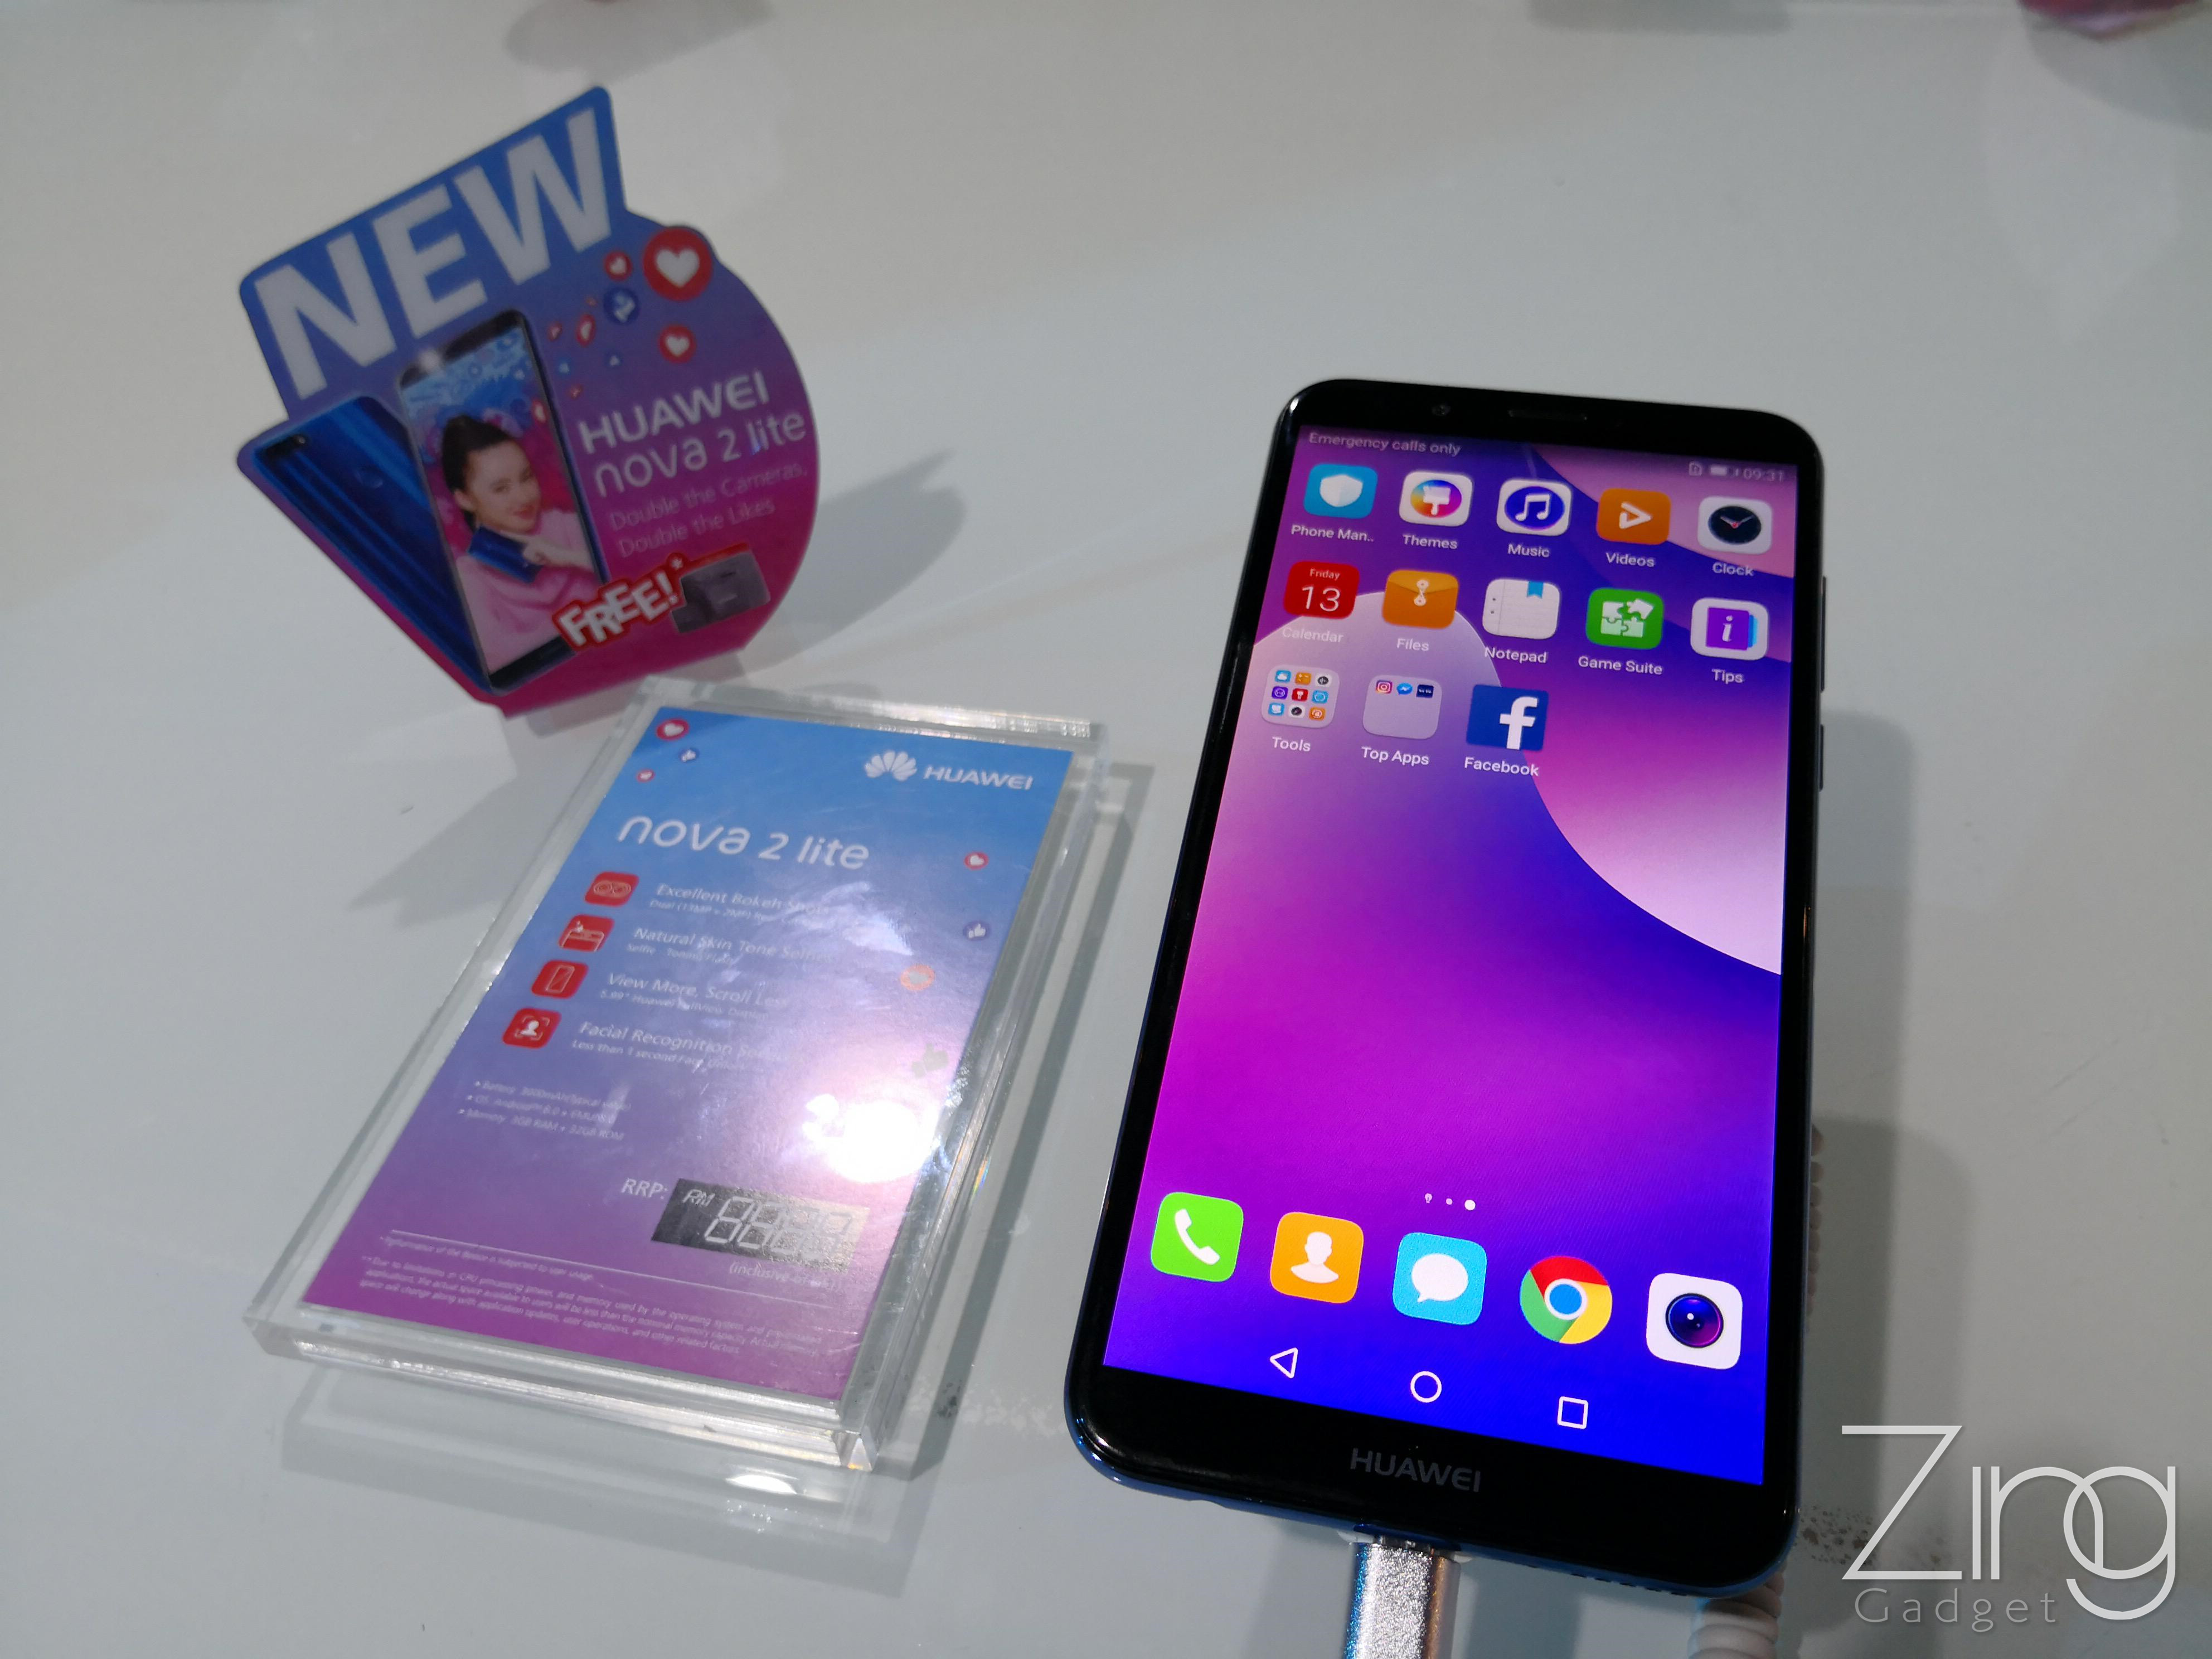 Huawei Nova 2 Lite launched with 5.99" display for RM799! - Zing Gadget